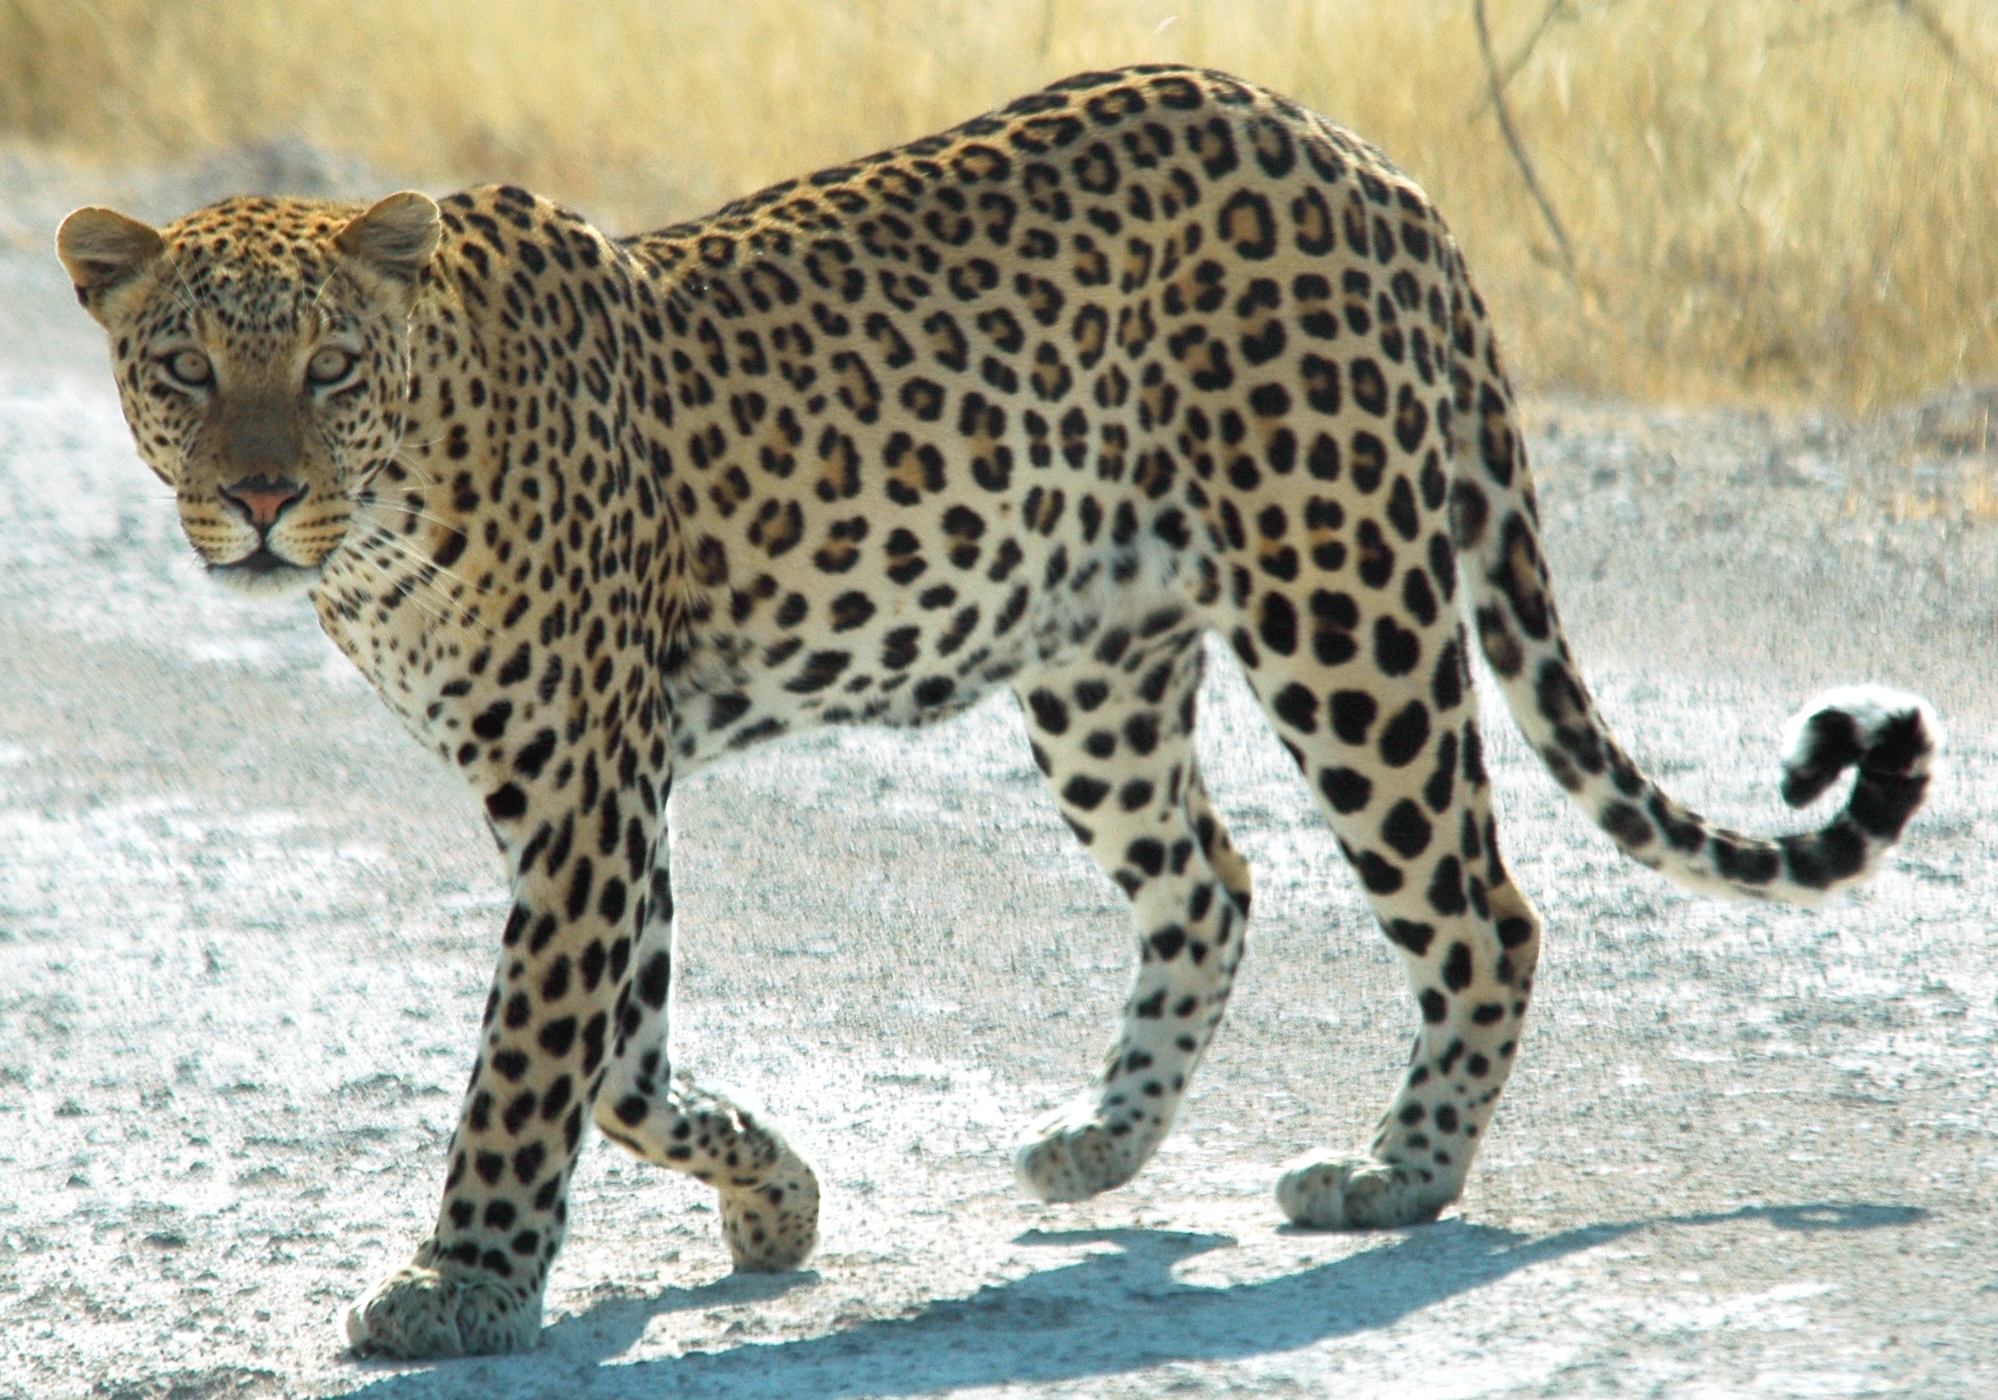 4. The Leopard